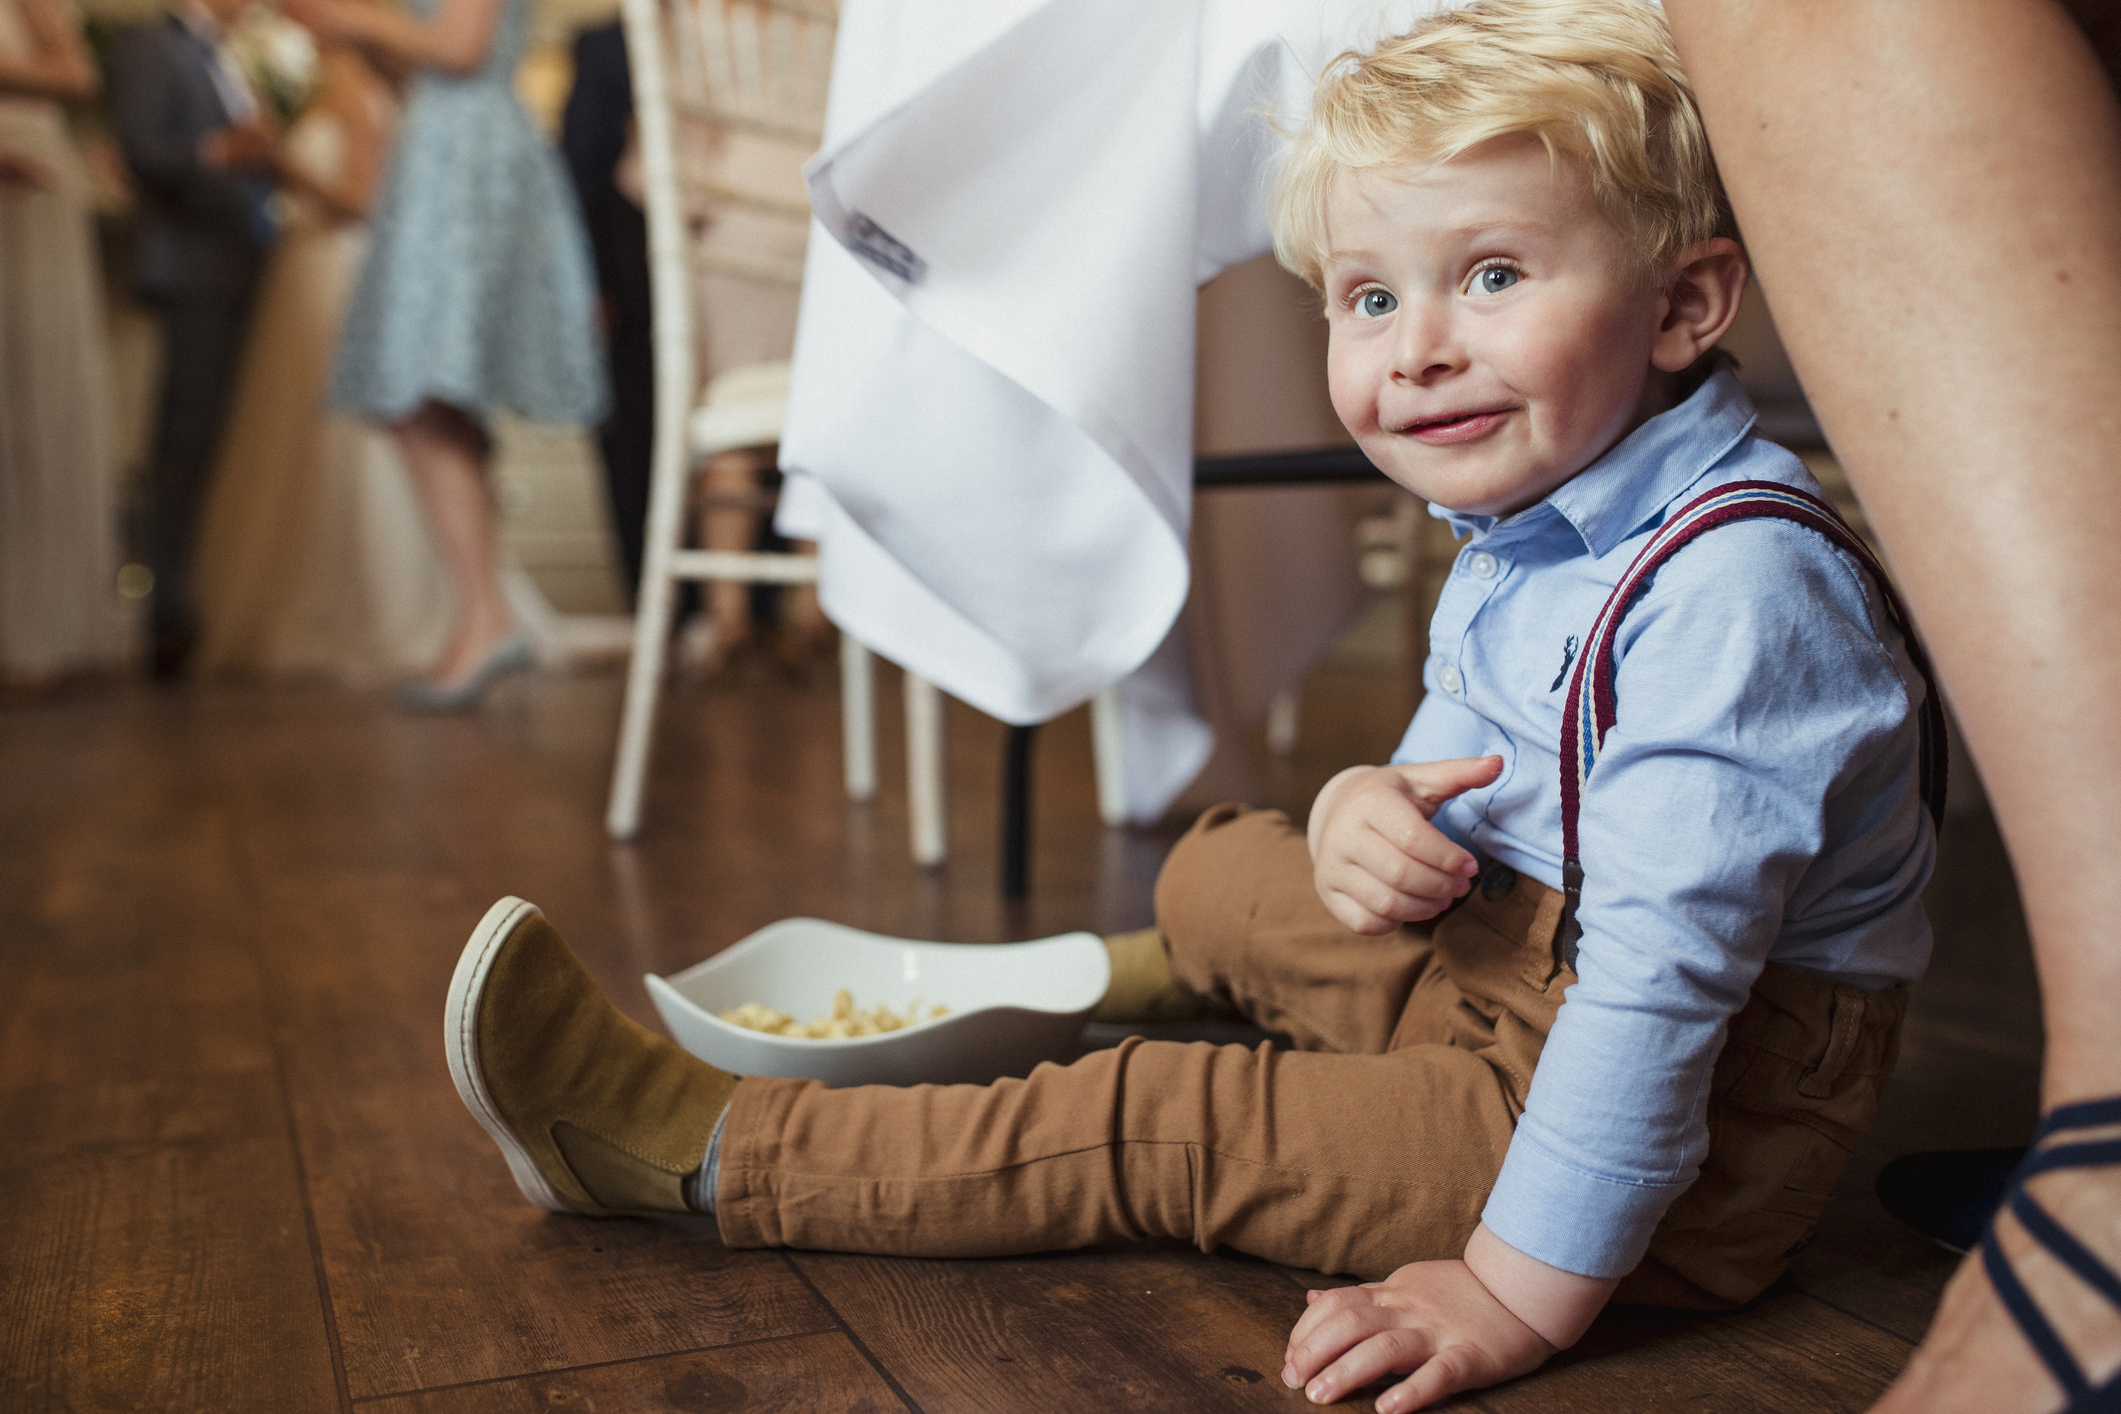 A toddler sitting on the floor and smiling